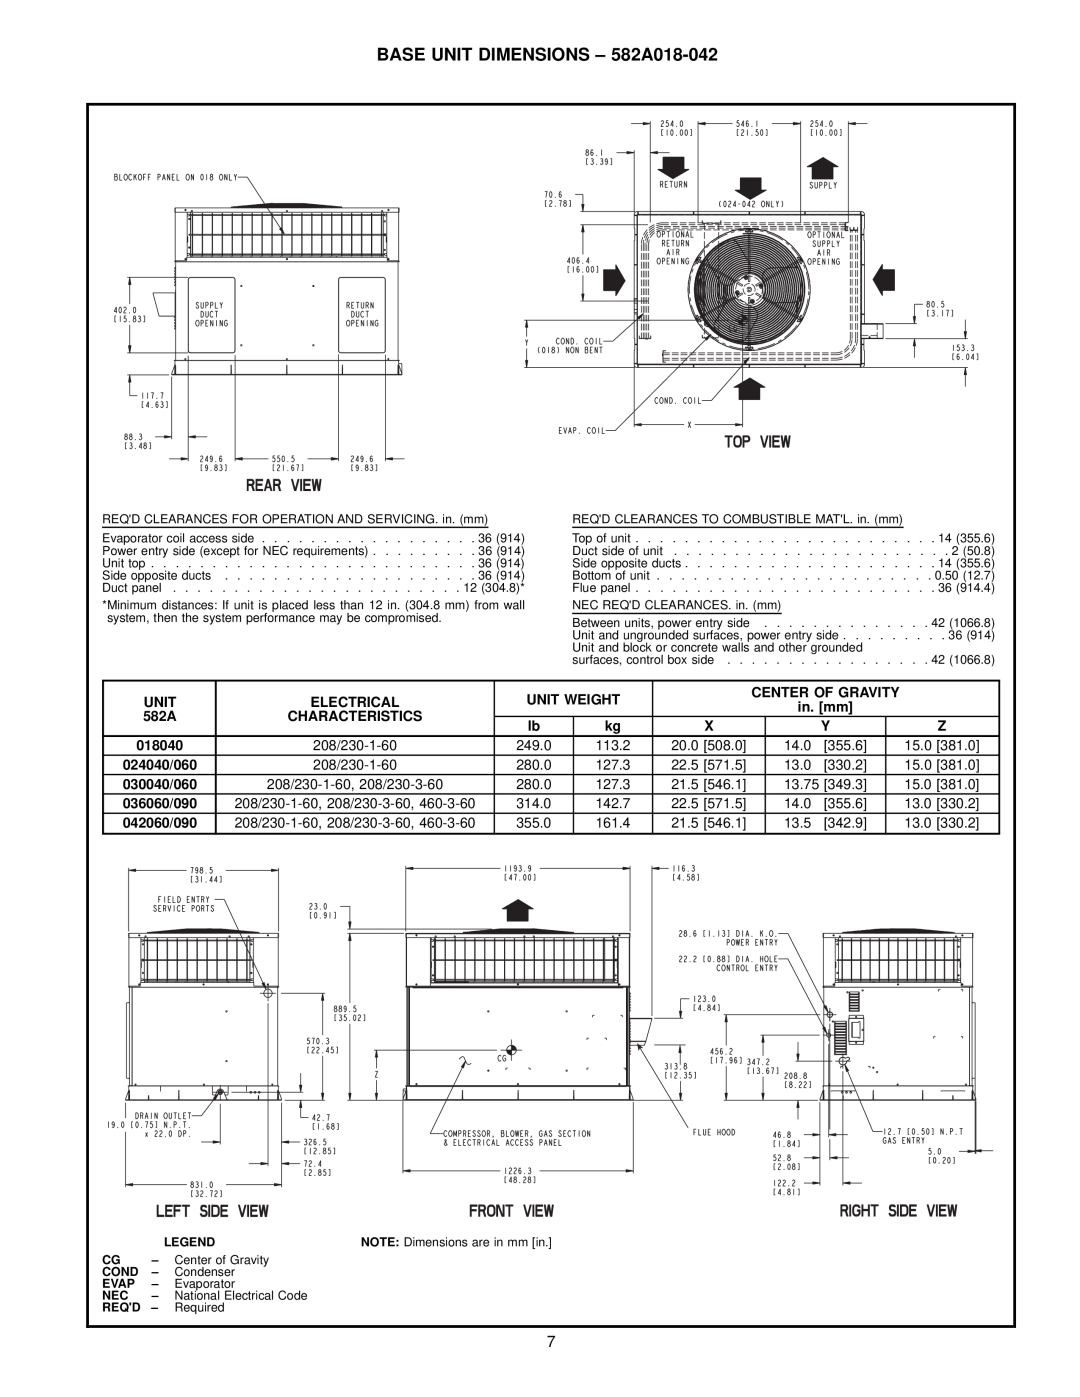 Bryant BASE UNIT DIMENSIONS - 582A018-042, Electrical, Unit Weight, Center Of Gravity, Characteristics, 018040 